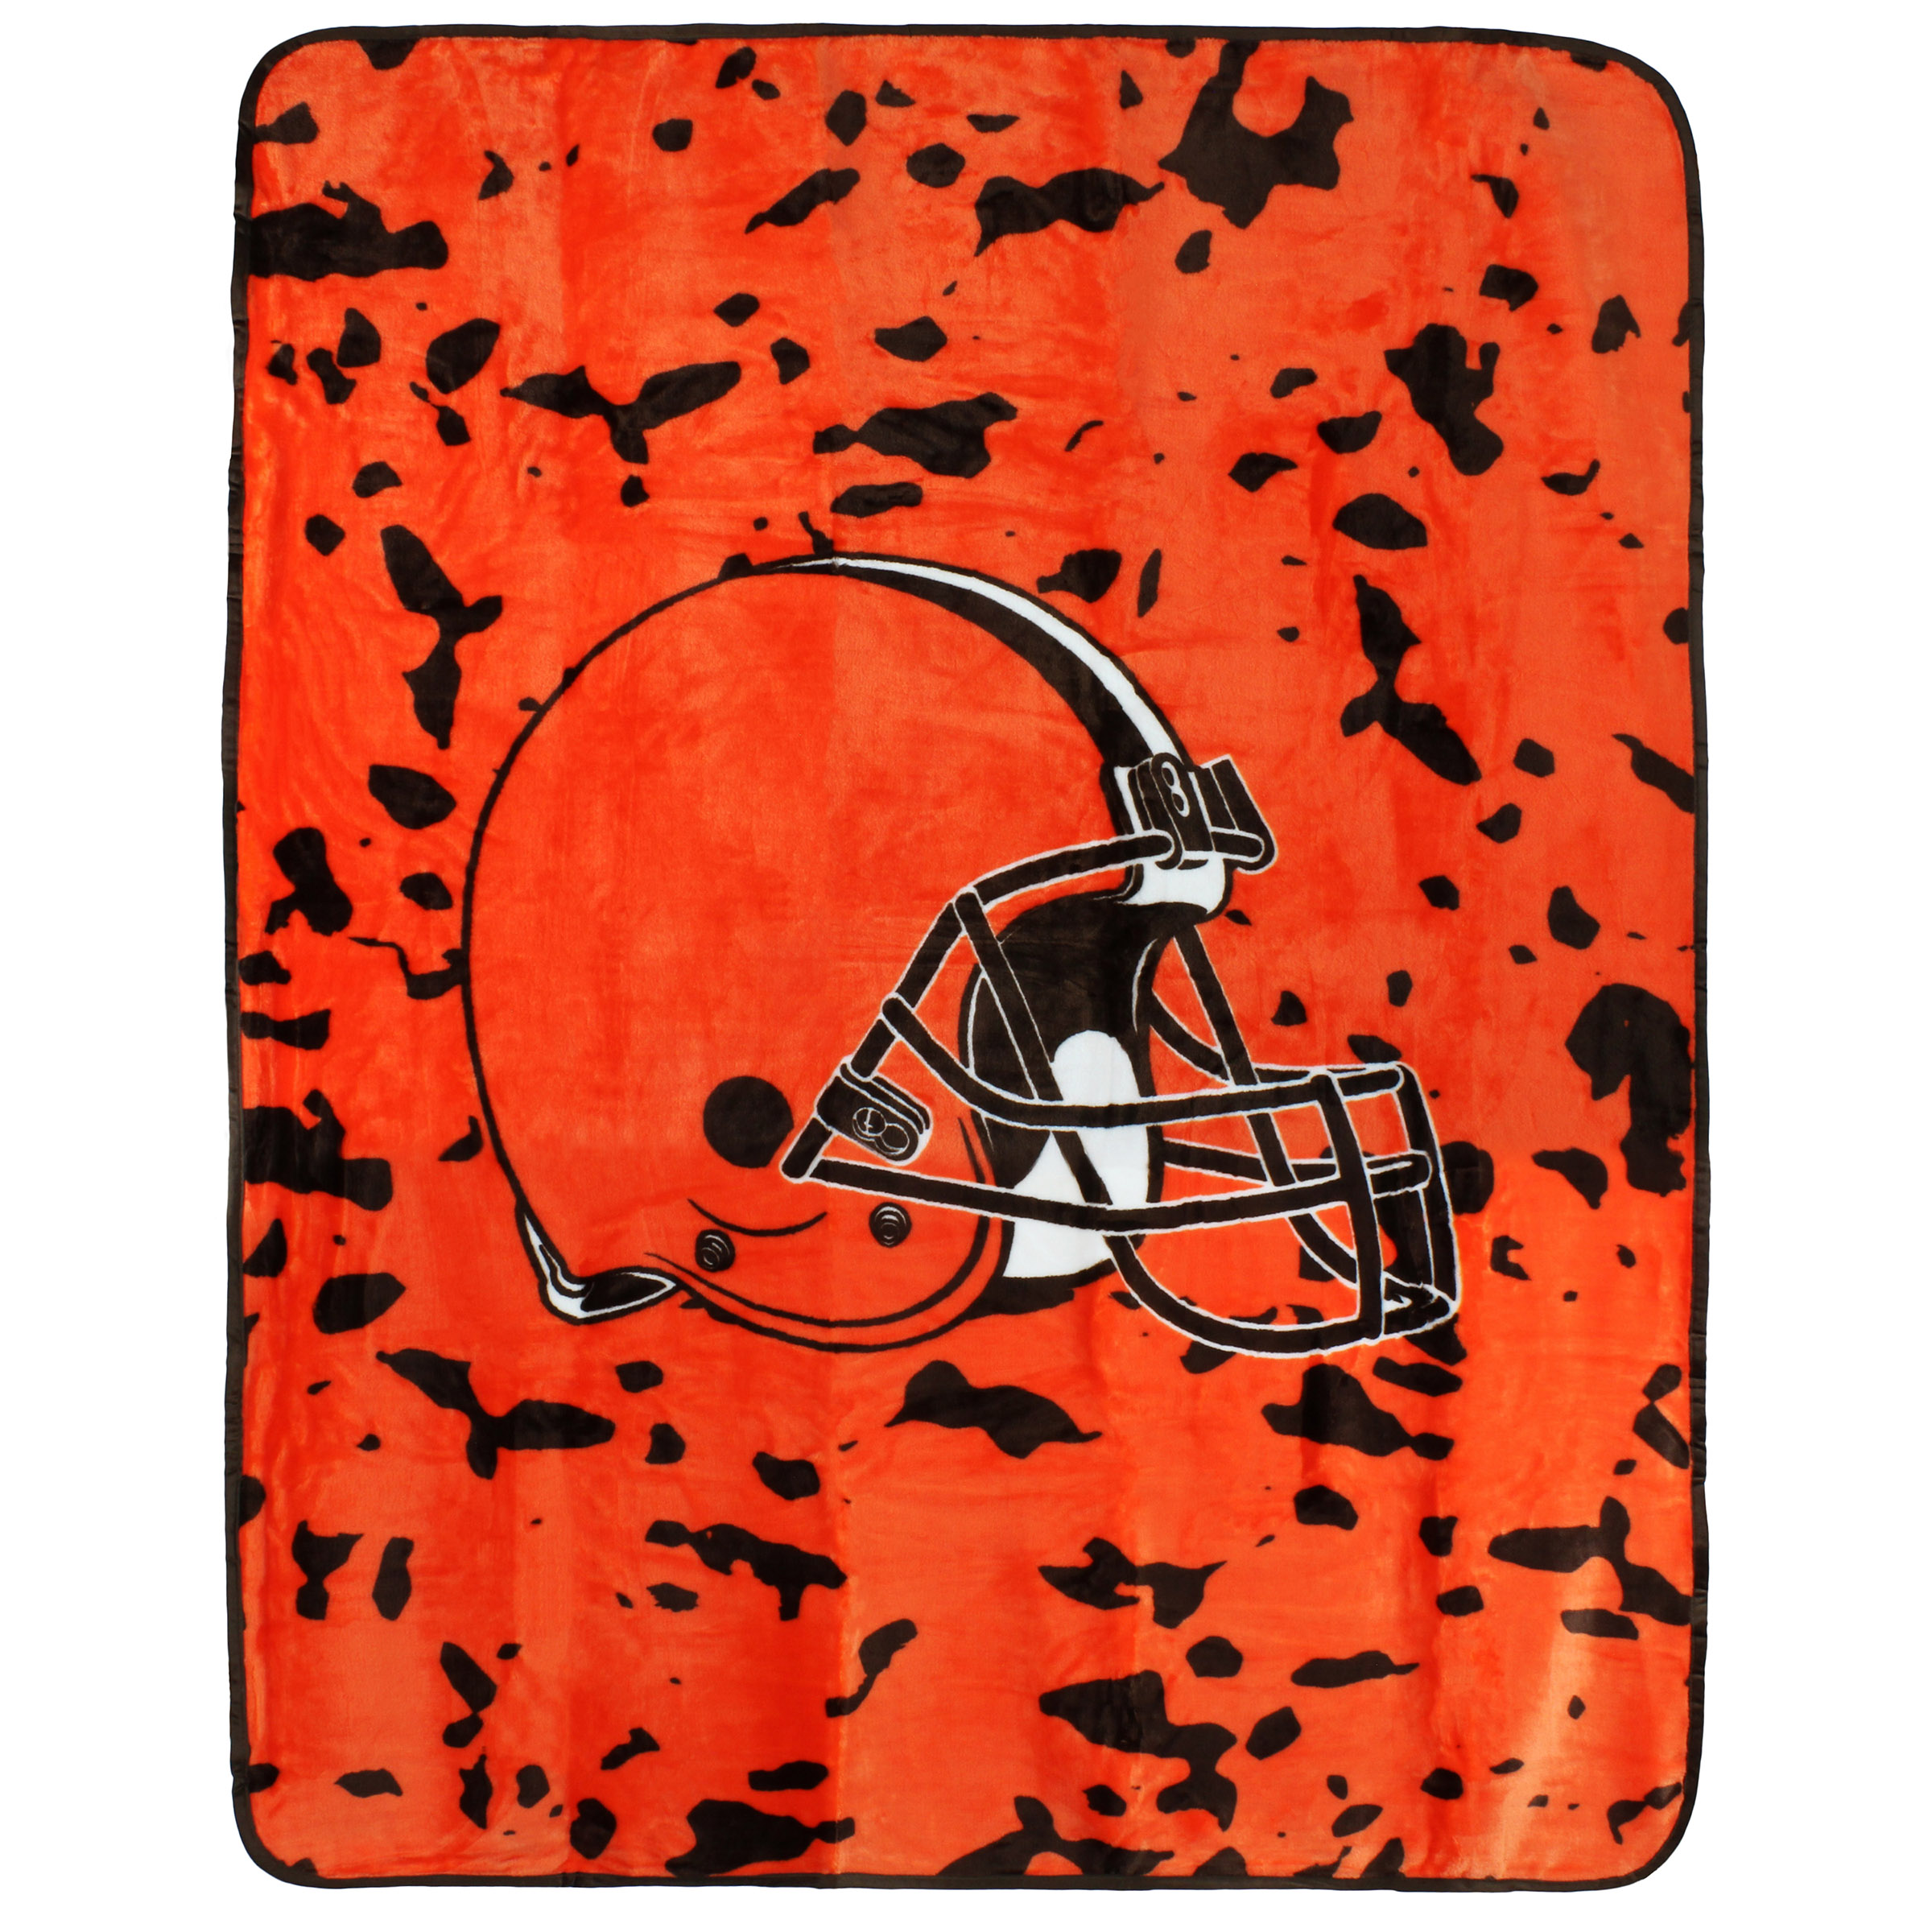 Cleveland Browns 50 x 60 Teen Adult Unisex Comfy Throw Blanket - image 1 of 5